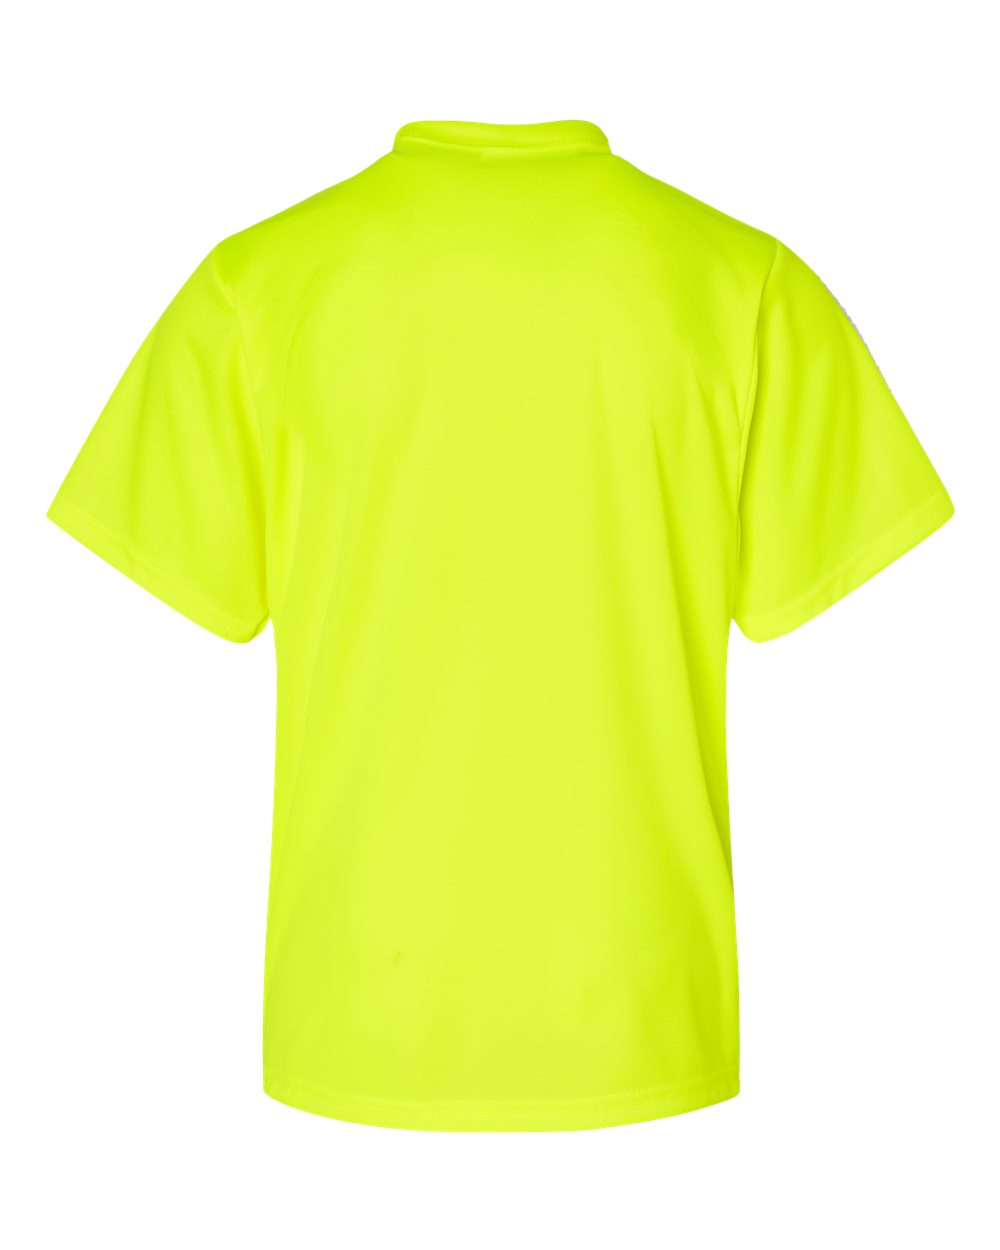 C2 Sport Youth Performance T-Shirt 5200 #color_Safety Yellow